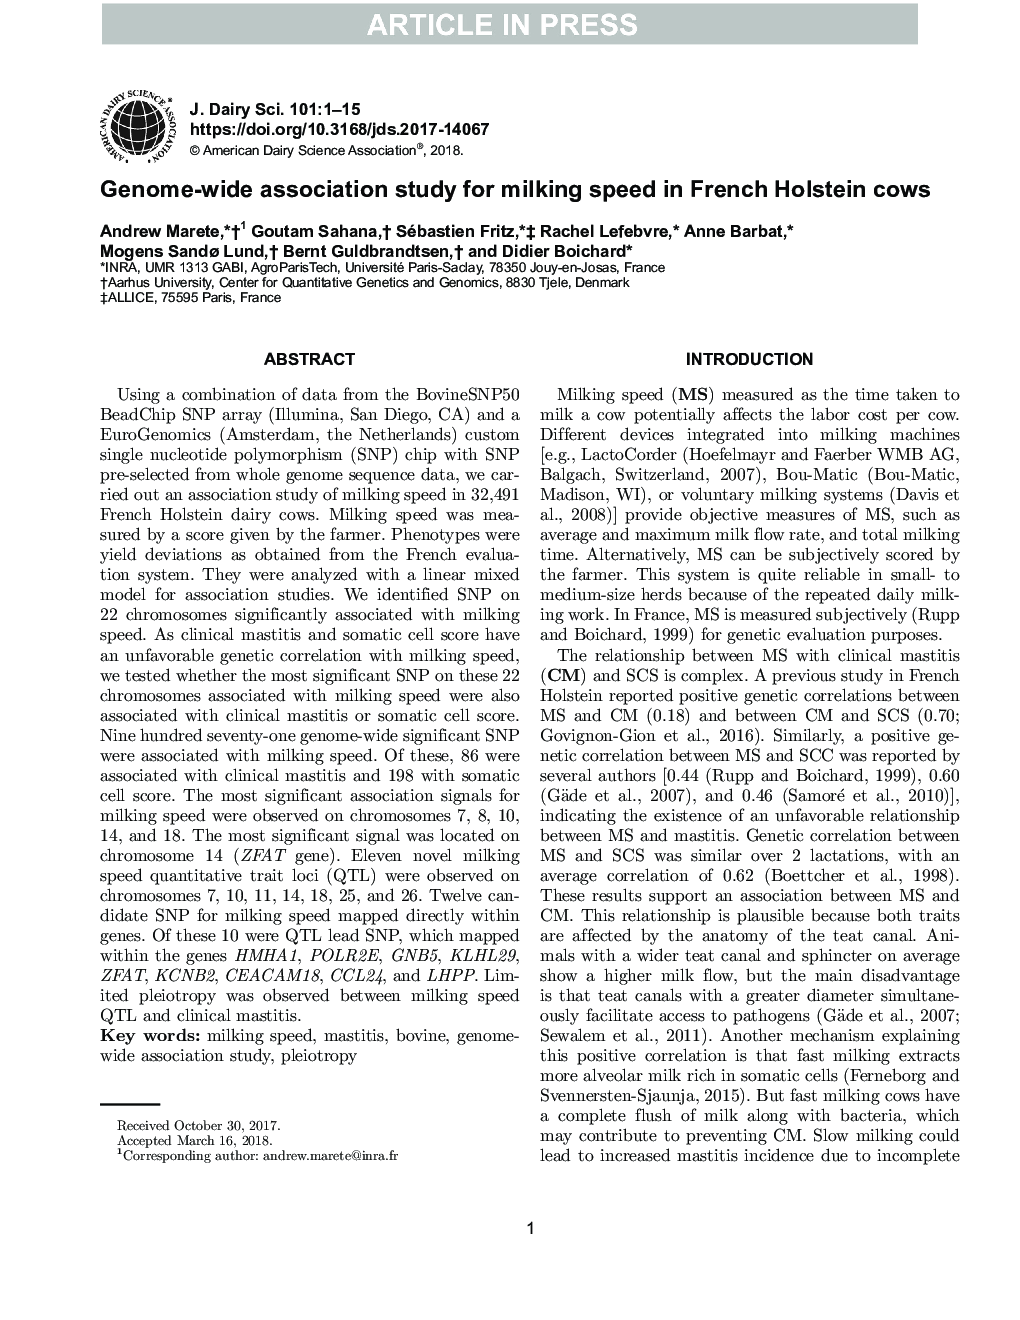 Genome-wide association study for milking speed in French Holstein cows